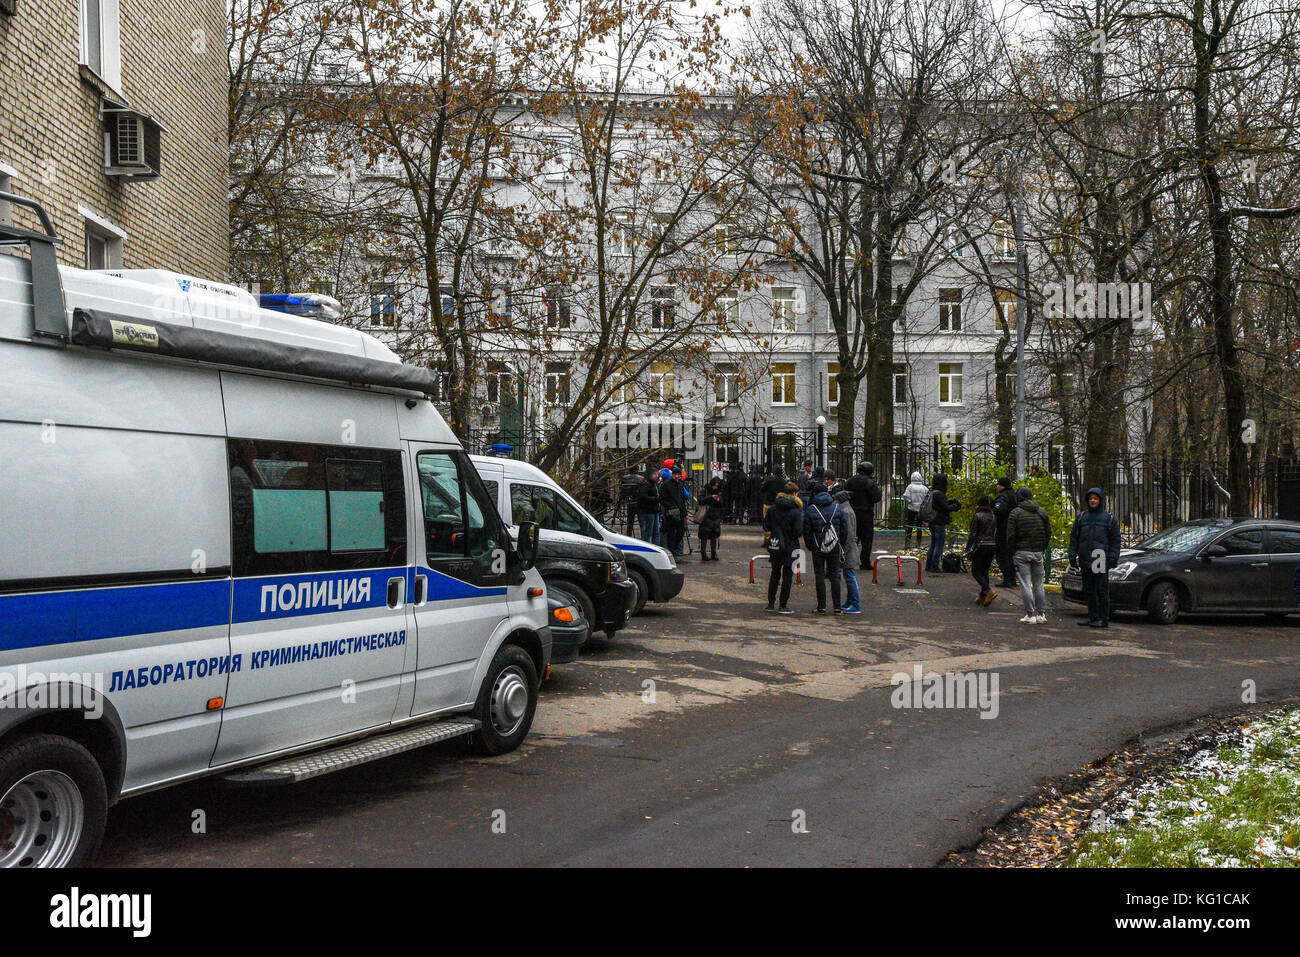 Moscow, Russia. 1 Nov, 2017. Police van outside polytechnic college № 42 on  Gvardeiskaya Street where dead bodies of a teacher and student were found.  Credit: JSPhoto/Alamy Live News Stock Photo - Alamy